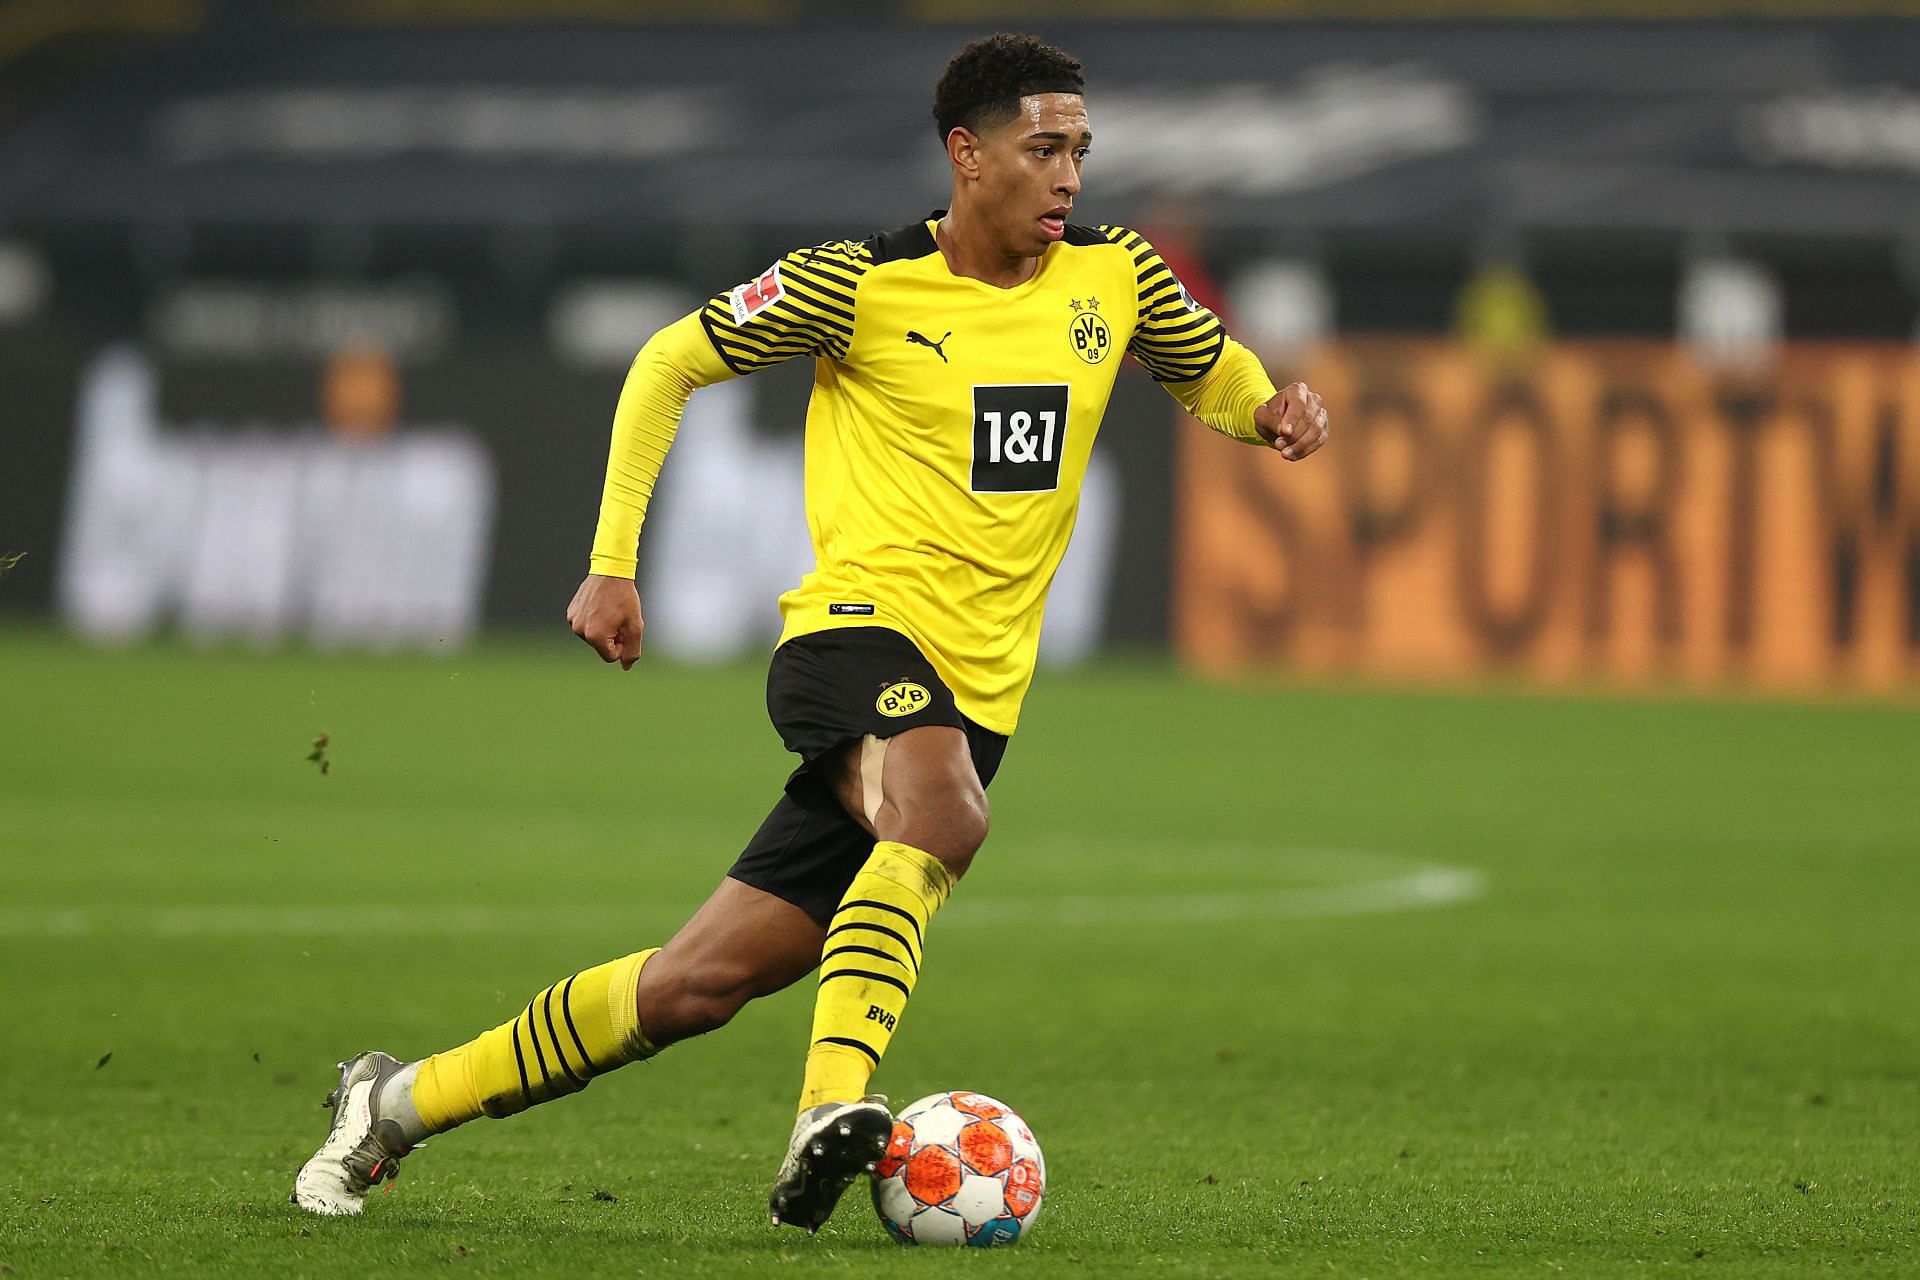 One of the fastest rising stars in the Bundesliga right now